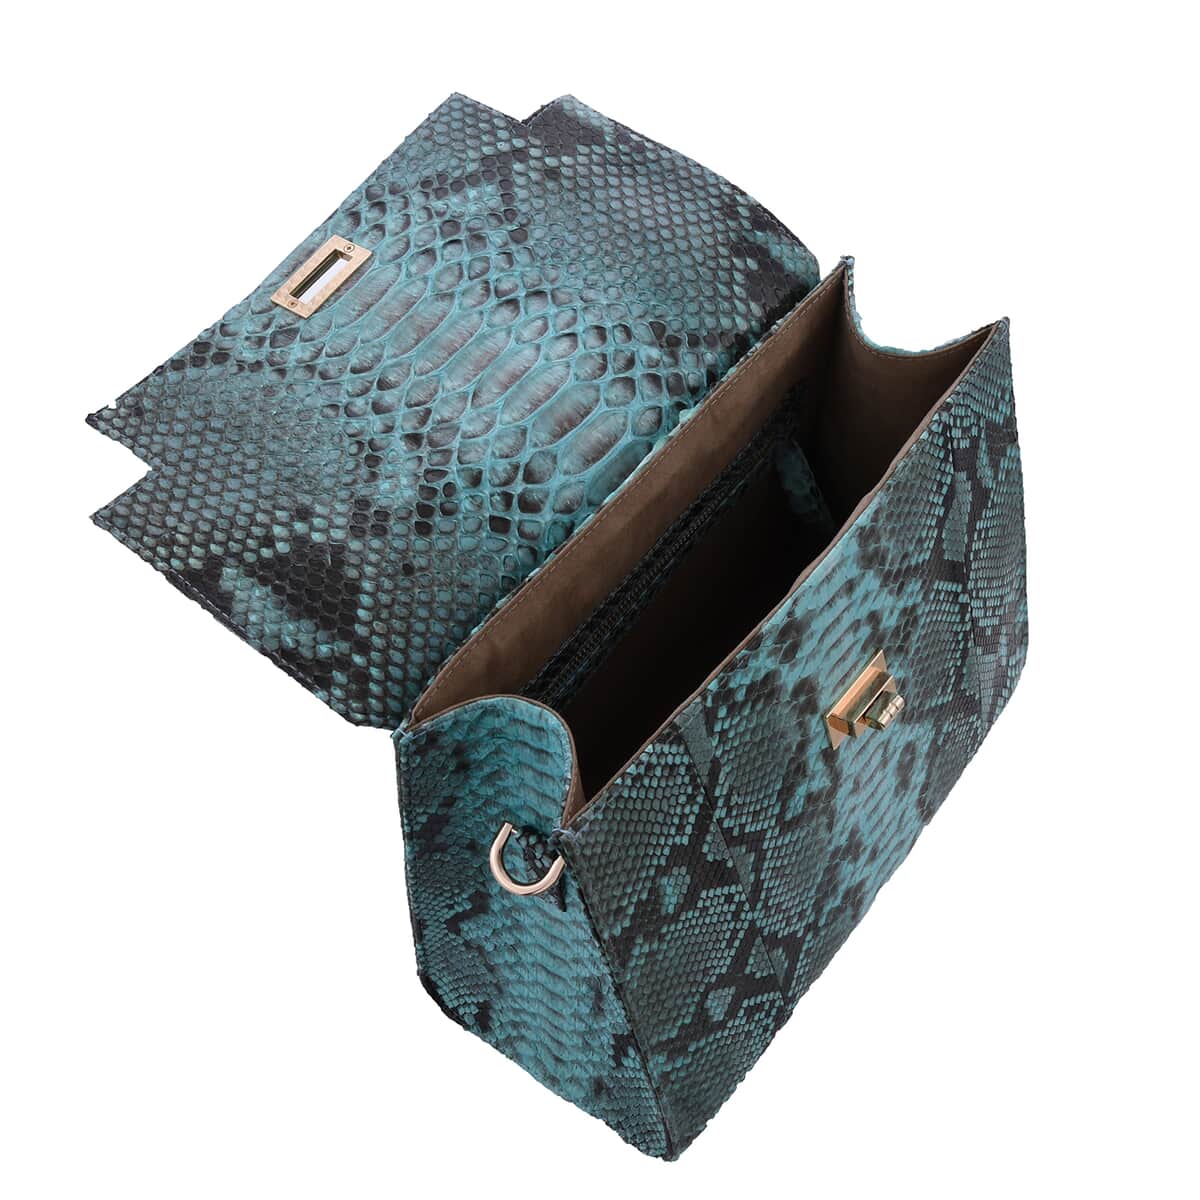 The Pelle Python Skin Bag Collection Blue Turquoise Color 100% Genuine Python Leather Tote Bag image number 2